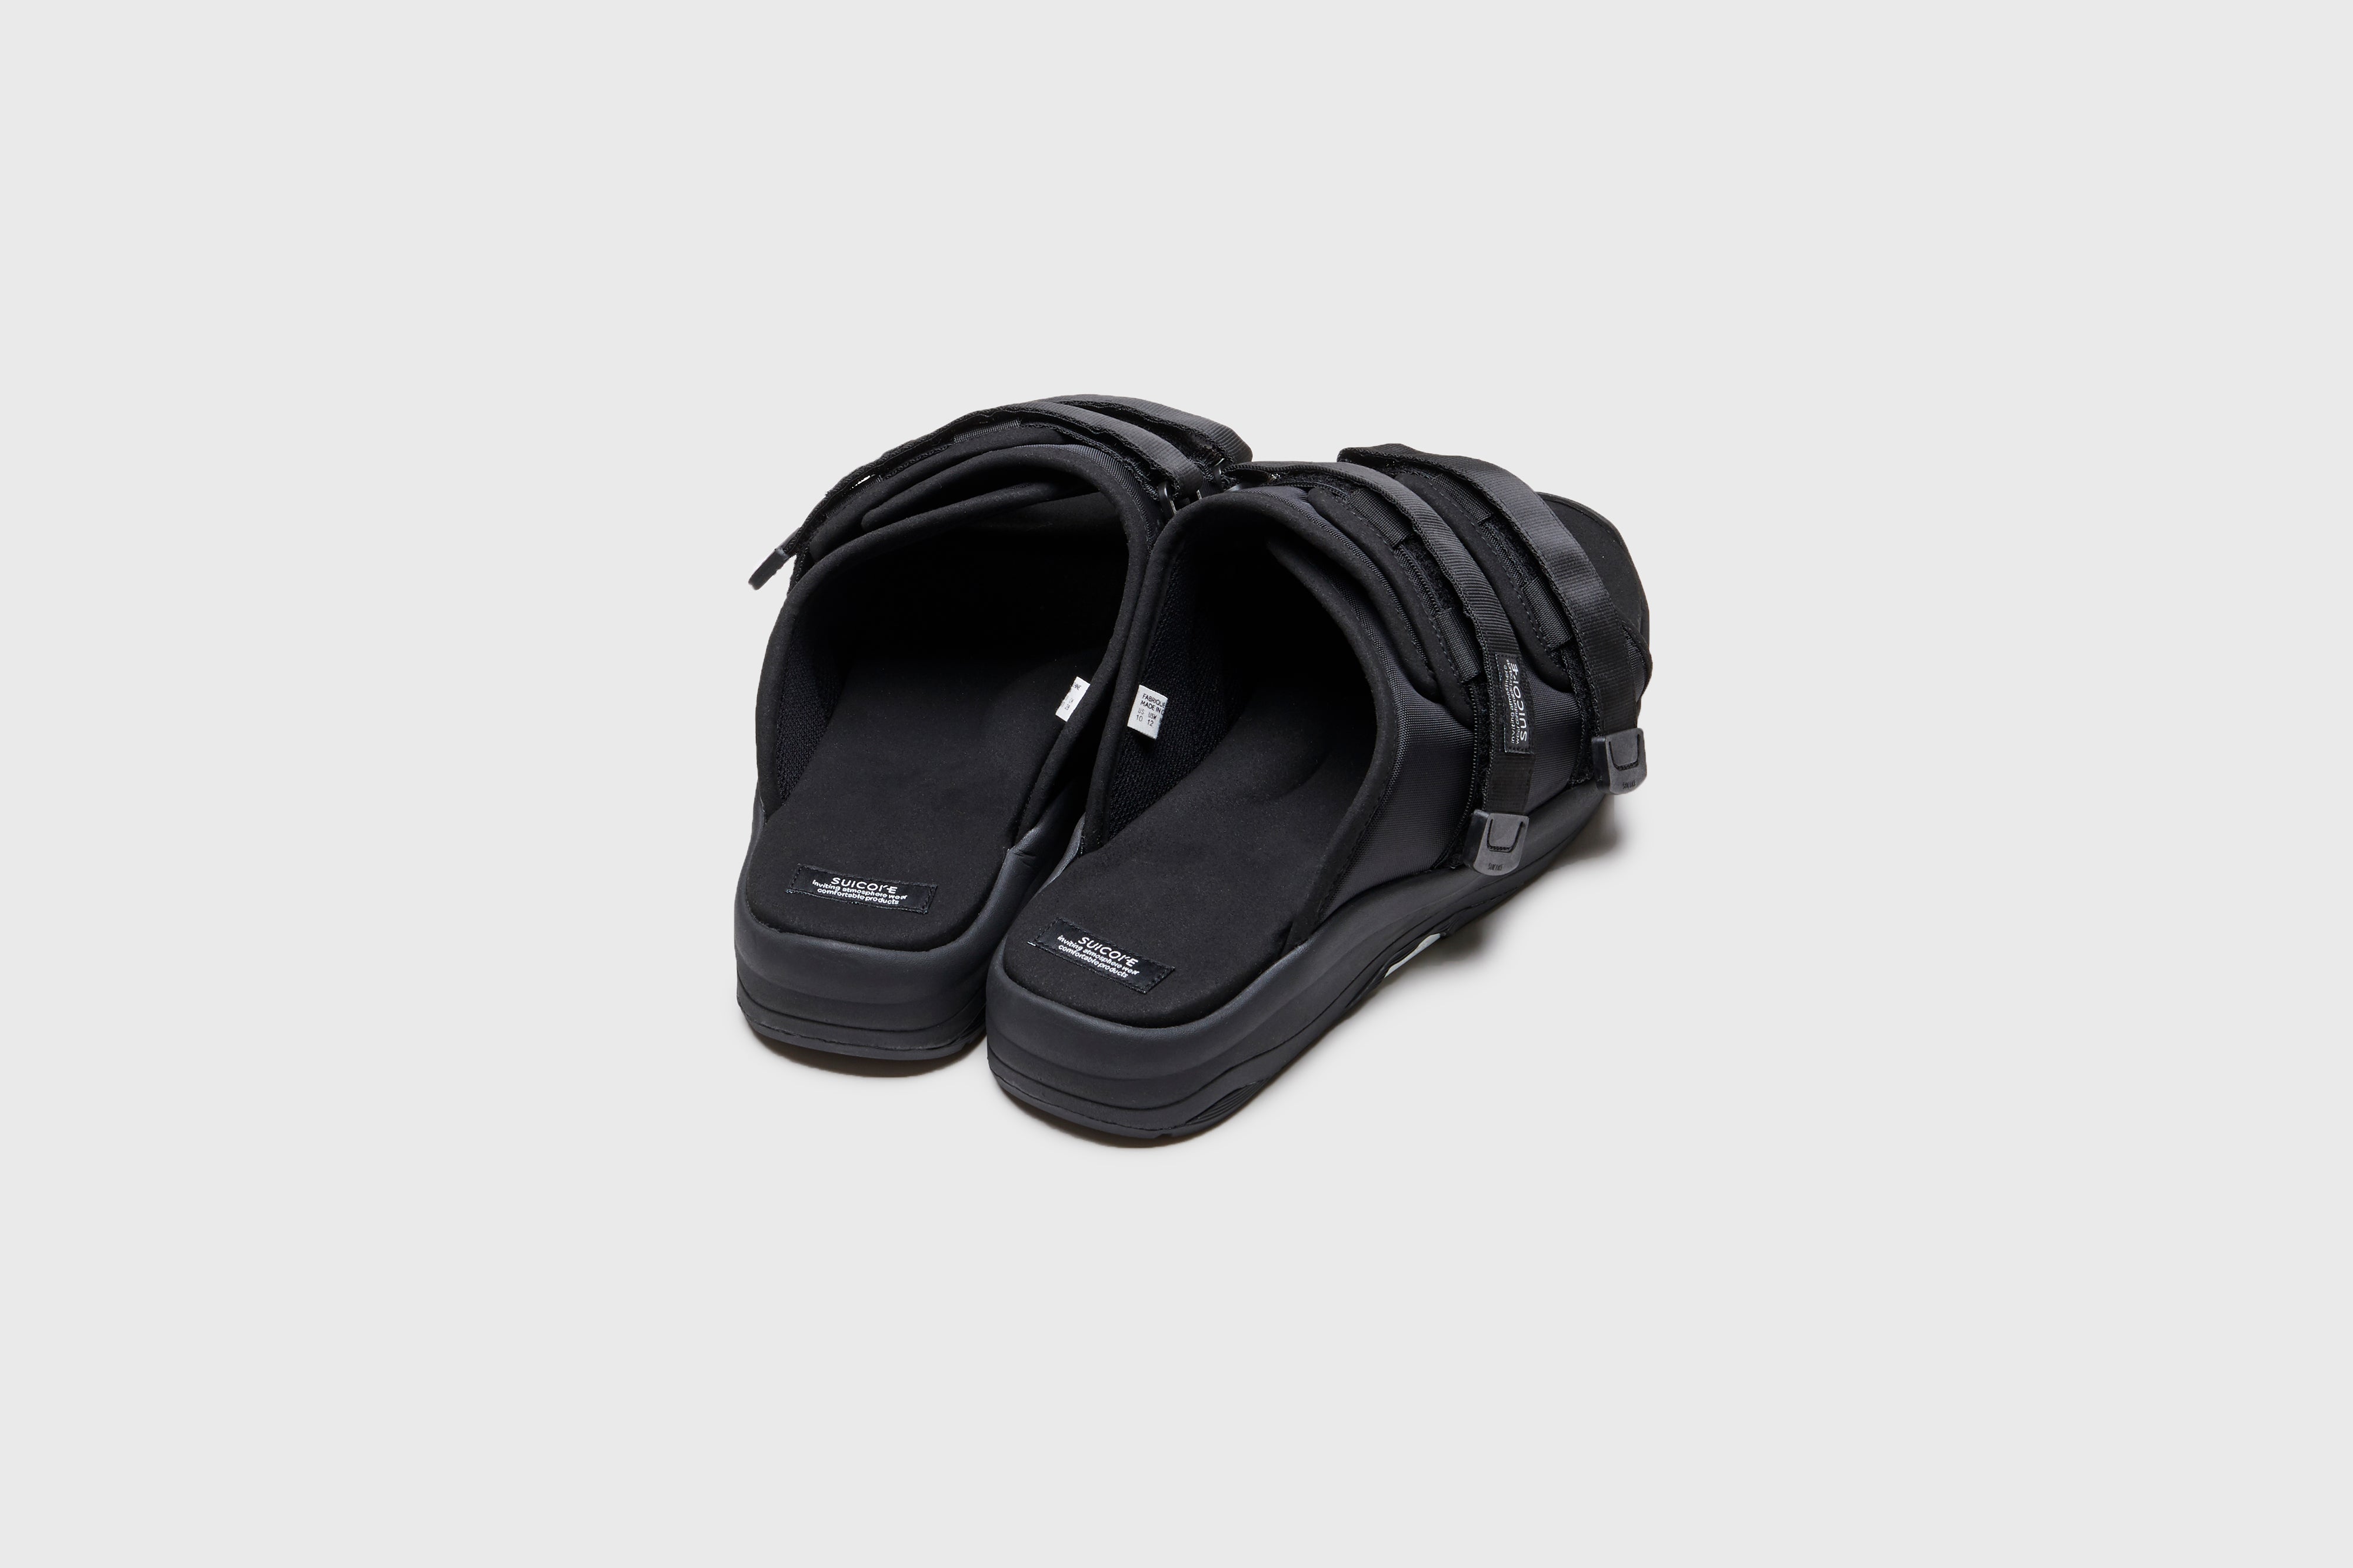 SUICOKE MOTO-Run slides with black nylon upper, black midsole and sole, strap and logo patch. From Spring/Summer 2023 collection on eightywingold Web Store, an official partner of SUICOKE. OG-332 BLACK